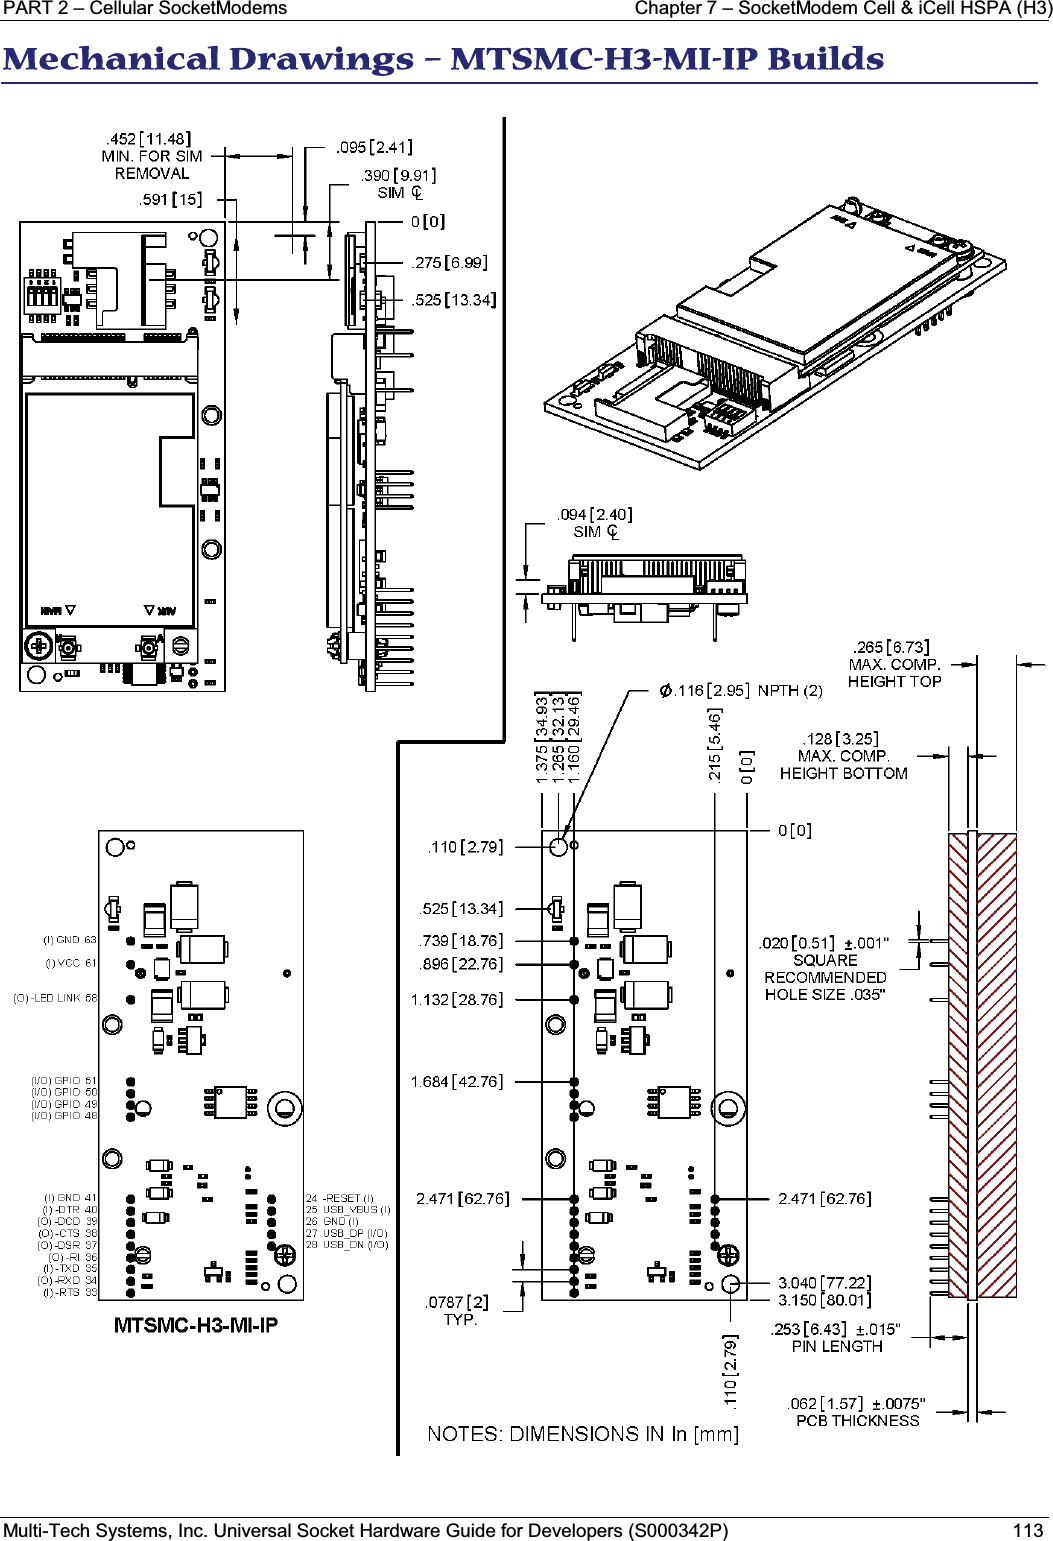 PART 2 – Cellular SocketModems Chapter 7 – SocketModem Cell &amp; iCell HSPA (H3)Multi-Tech Systems, Inc. Universal Socket Hardware Guide for Developers (S000342P) 113MMechanical Drawings – MTSMC-H3-MI-IP Builds 